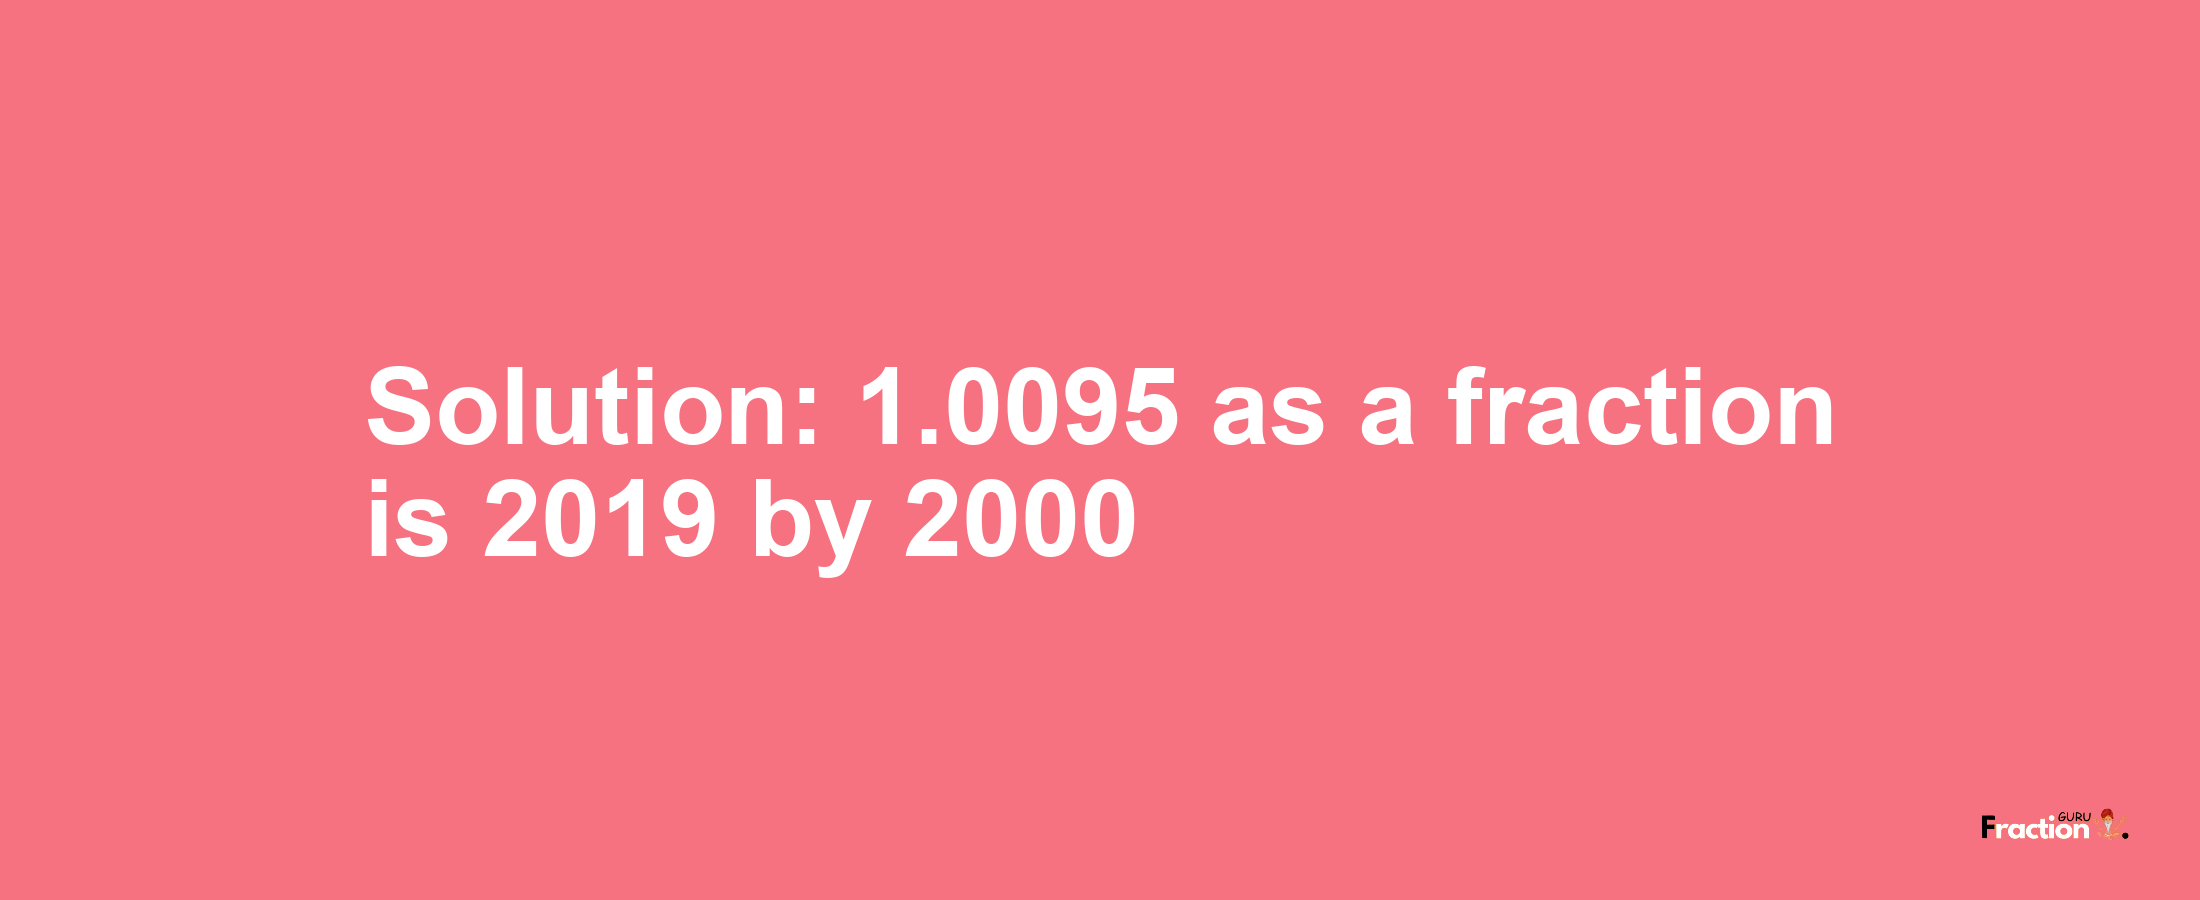 Solution:1.0095 as a fraction is 2019/2000